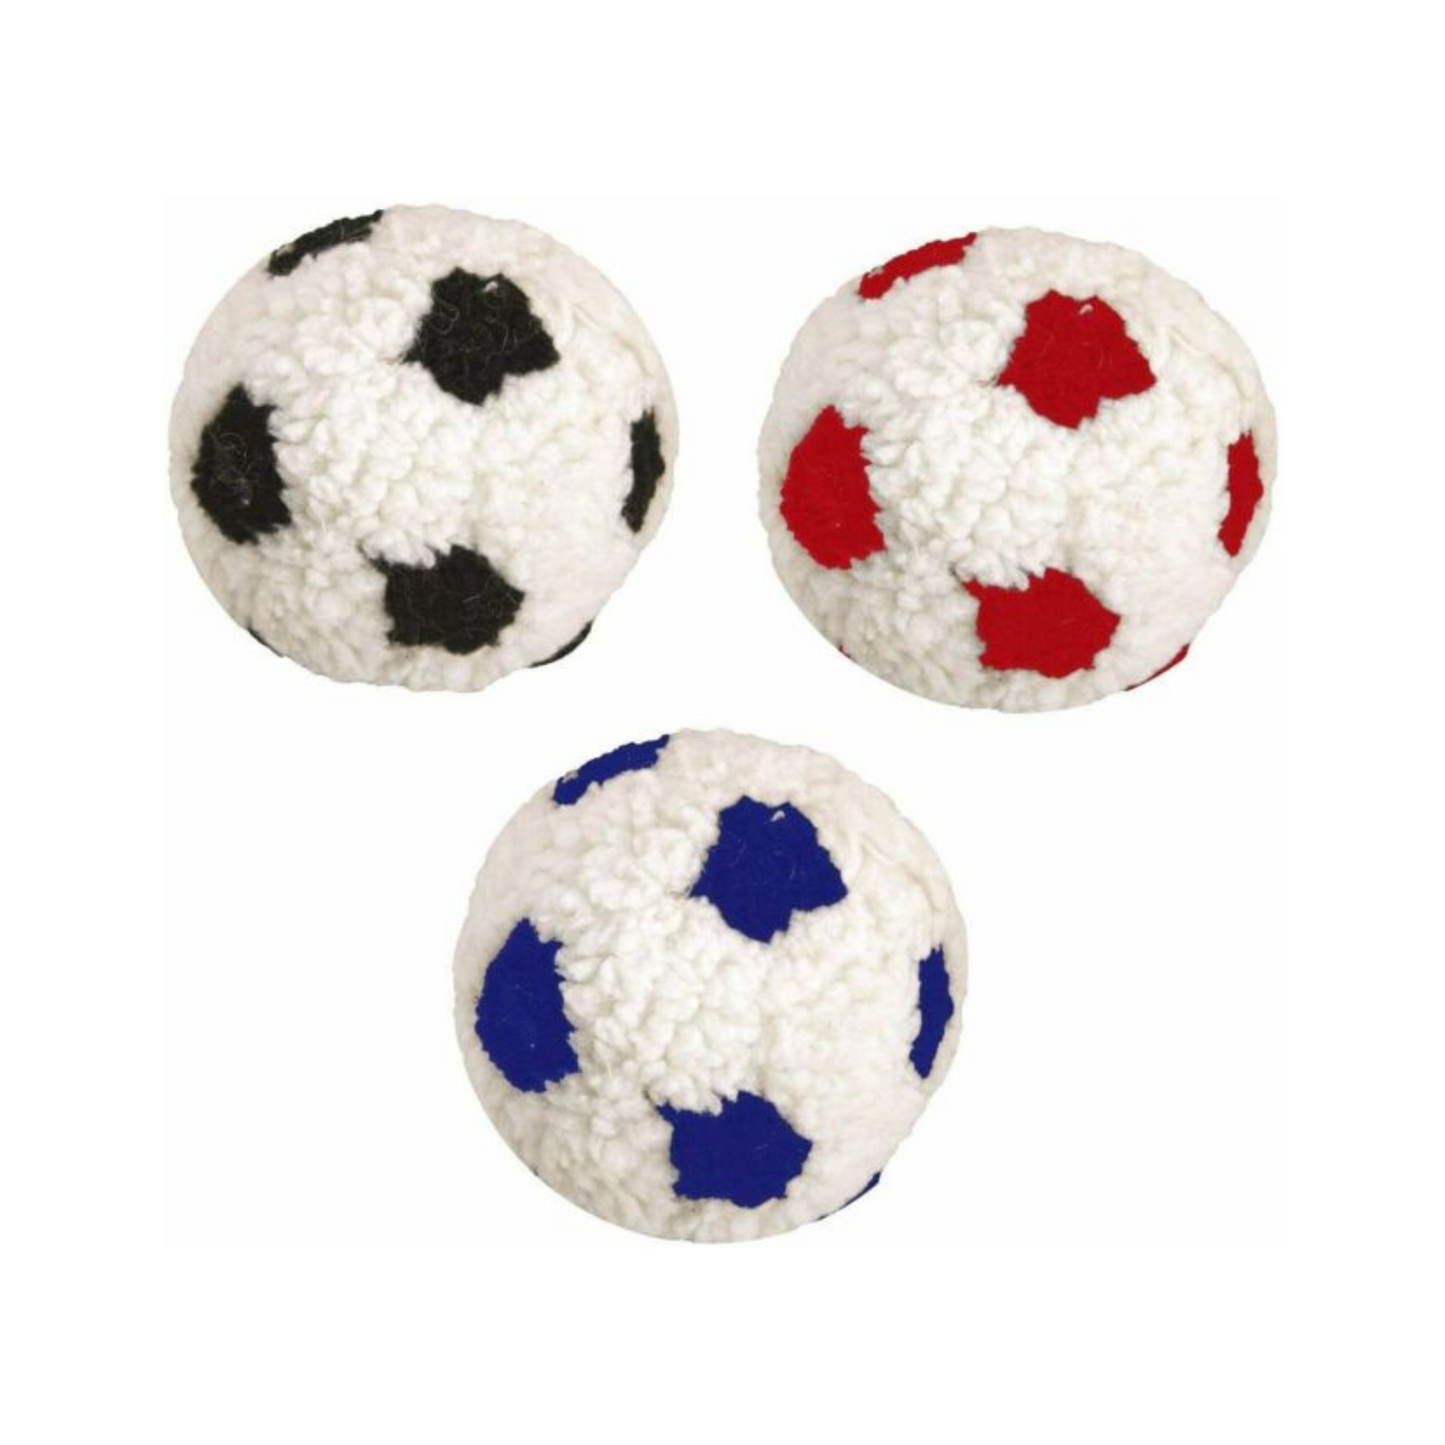 Football Dog Toy Soft Plush Fleece With Squeaker